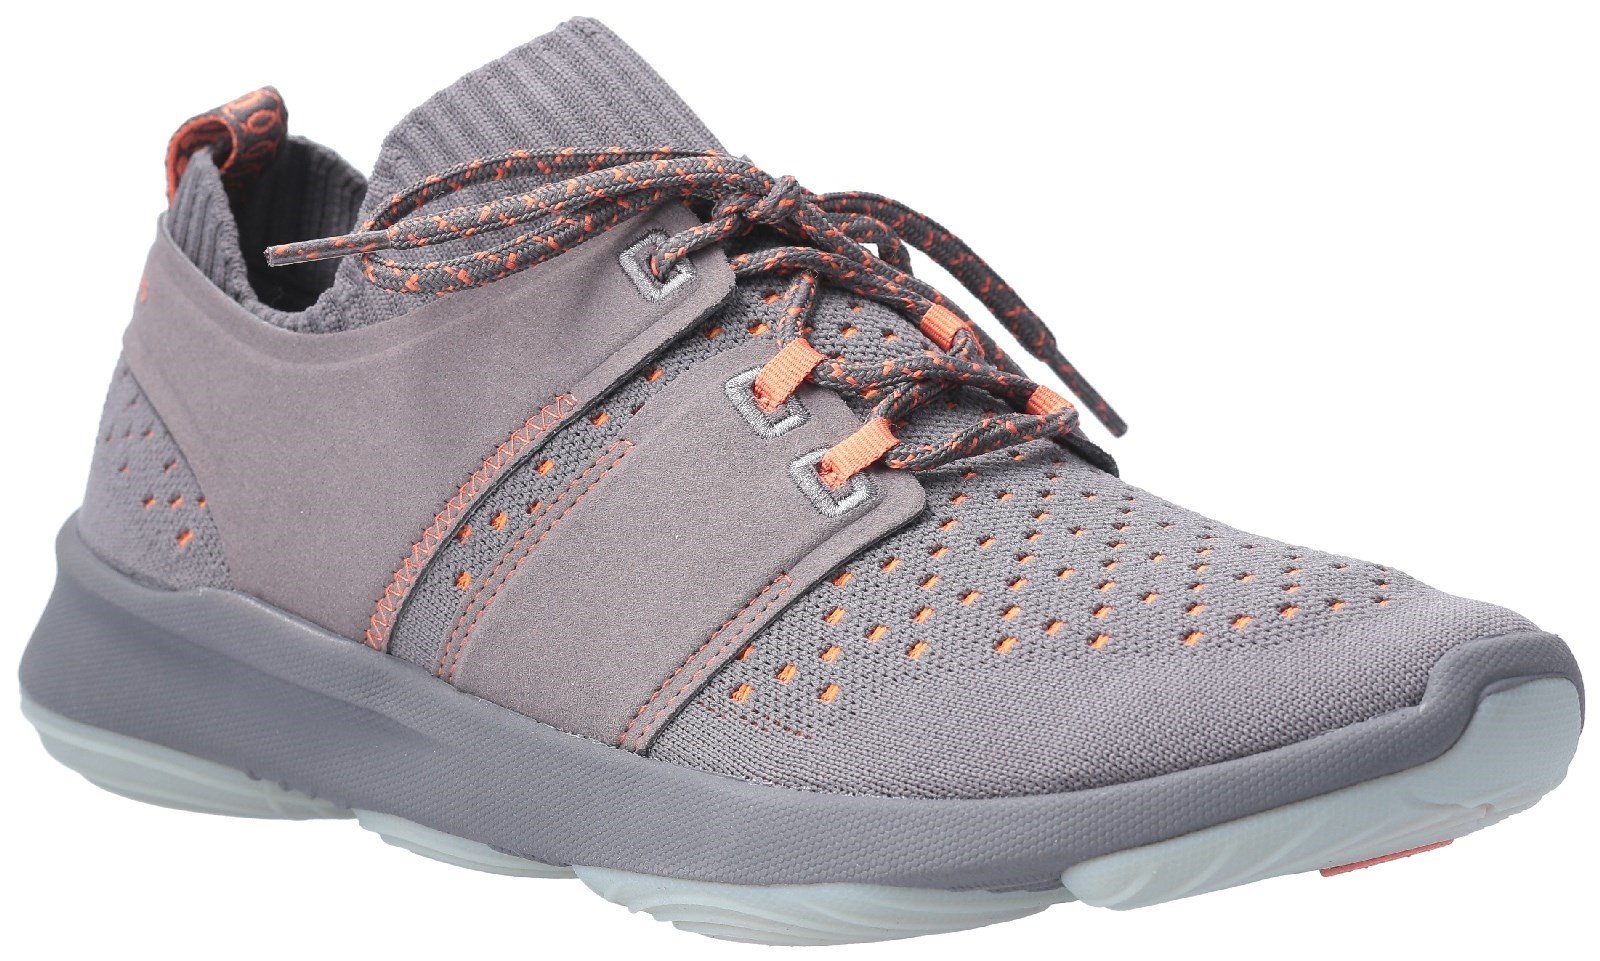 Hush Puppies Men's World BounceMax Lace Up Trainer Various Colours 28382 - Dark Grey 7